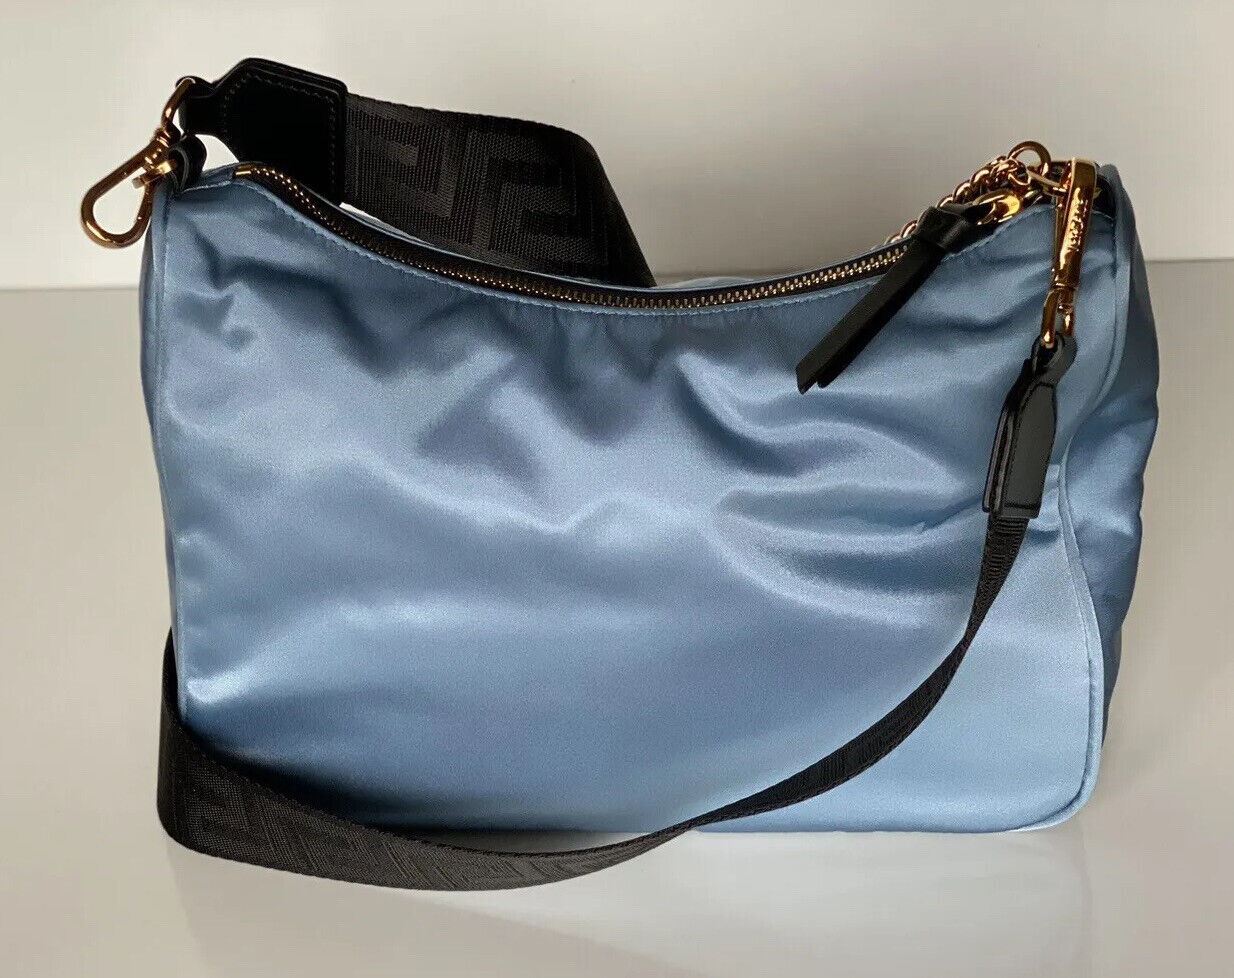 NWT Versace Nylon/Leather Cornflower Blue Hobo Bag Made in Italy 1002877 1A02155